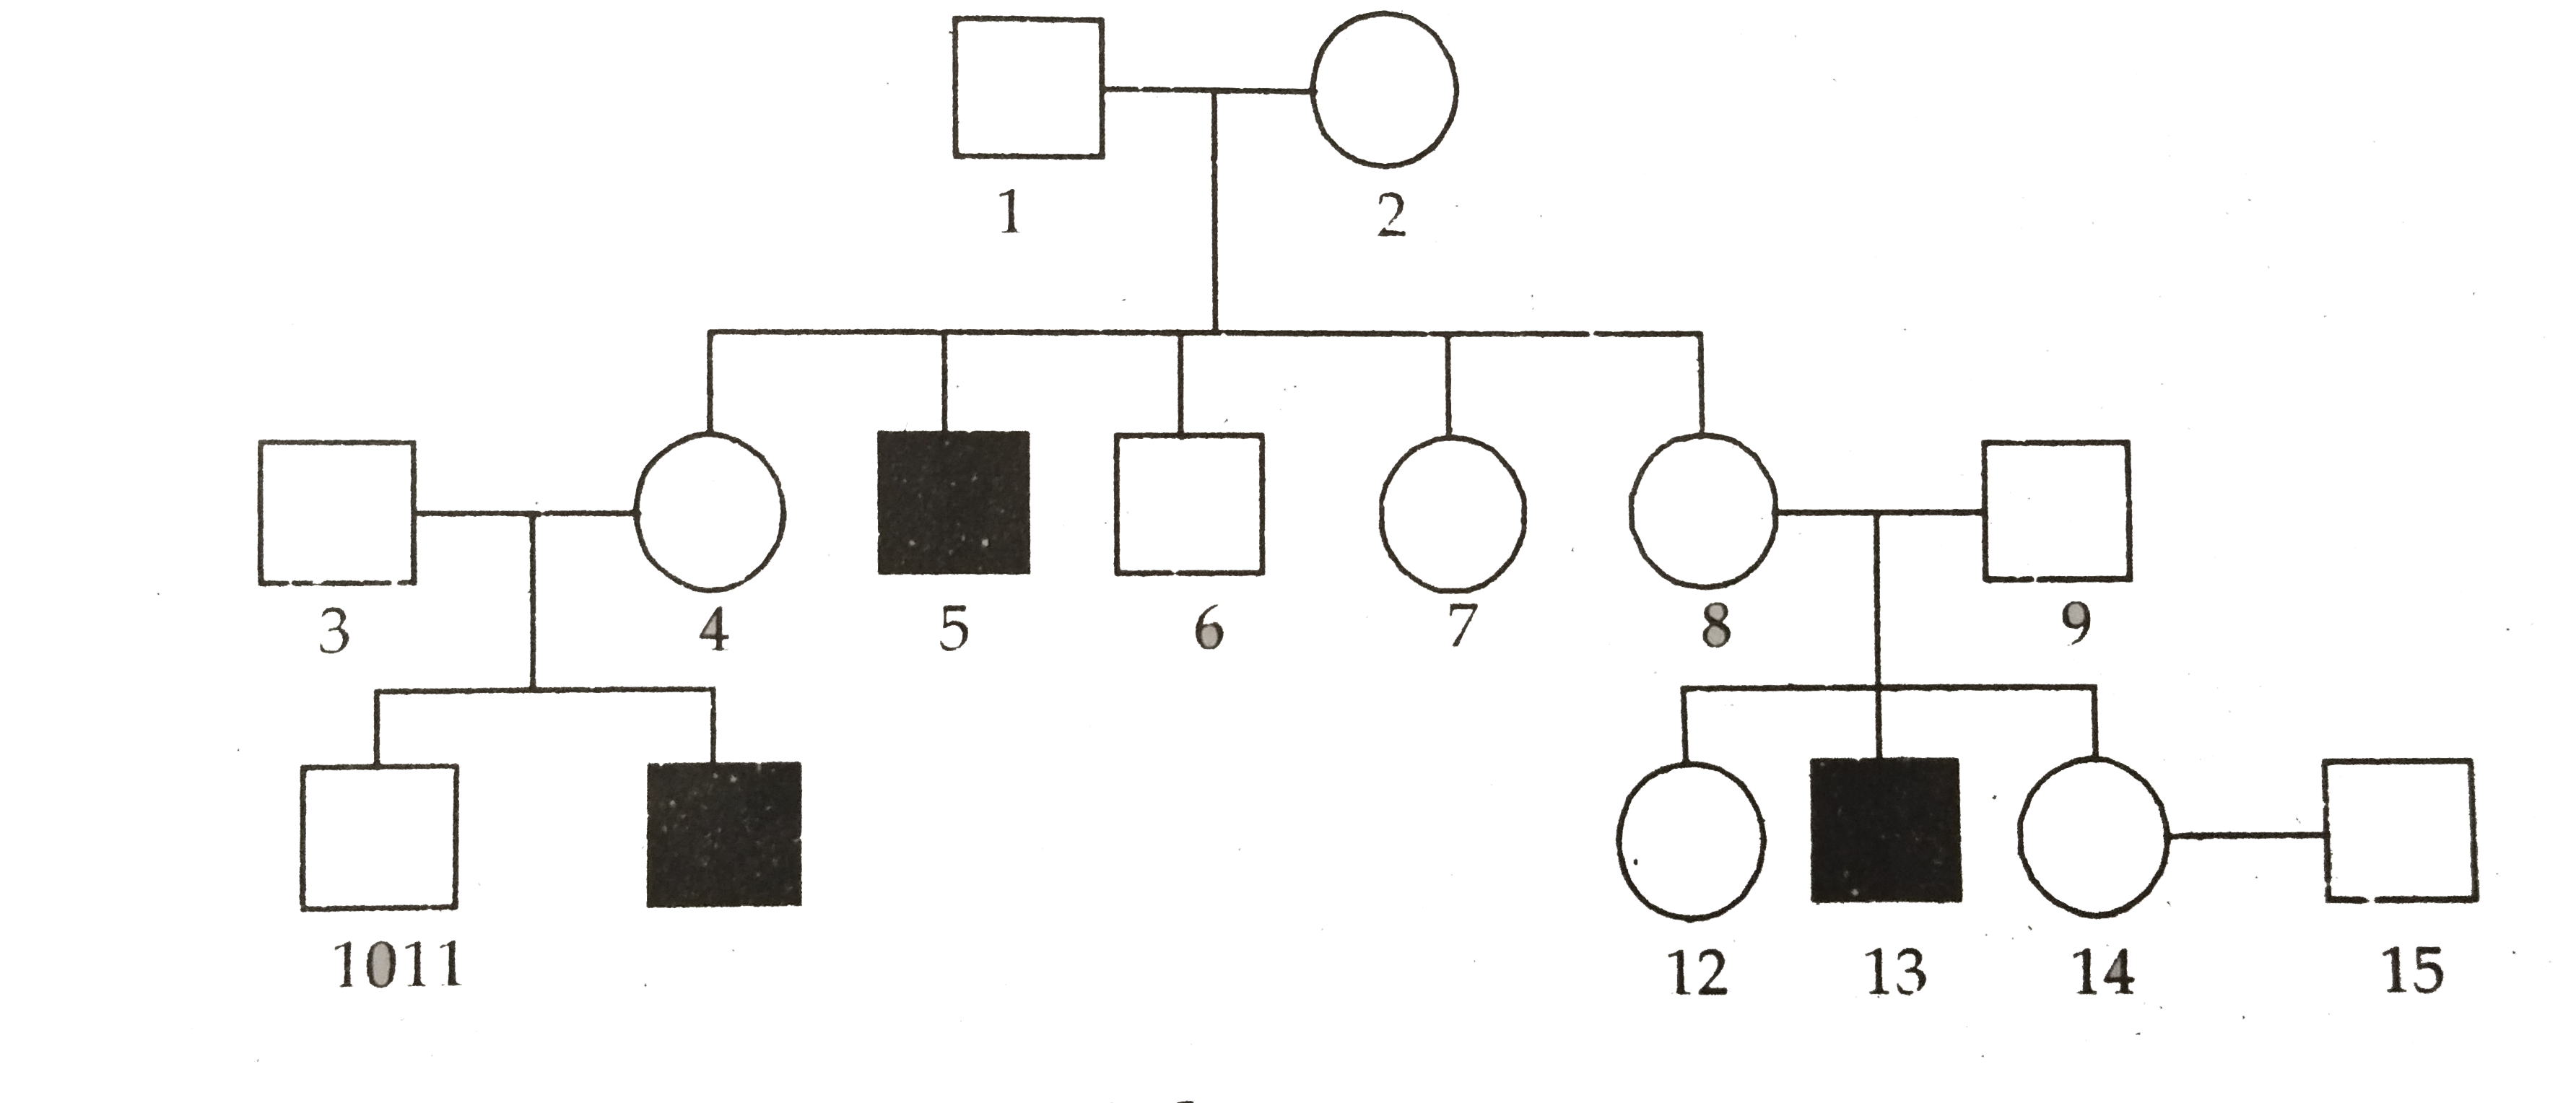 Haemophilia is a sex linked recessive disorder of humans. The pedigree chart given below shows the inheritance of haemophilia in one family. Study the pattern of inheritance and answer the questions given       Give all the possible genotypes of the members 4,5 and 6 in the pedigree chart.   (b) A blood test shows that the individual 14 is a carrier of haemophilia. The member numbered 15 has recently married the member numbered 14. What is the probability that their first child will be a haemophilic male? Show with the help of Punnett square.